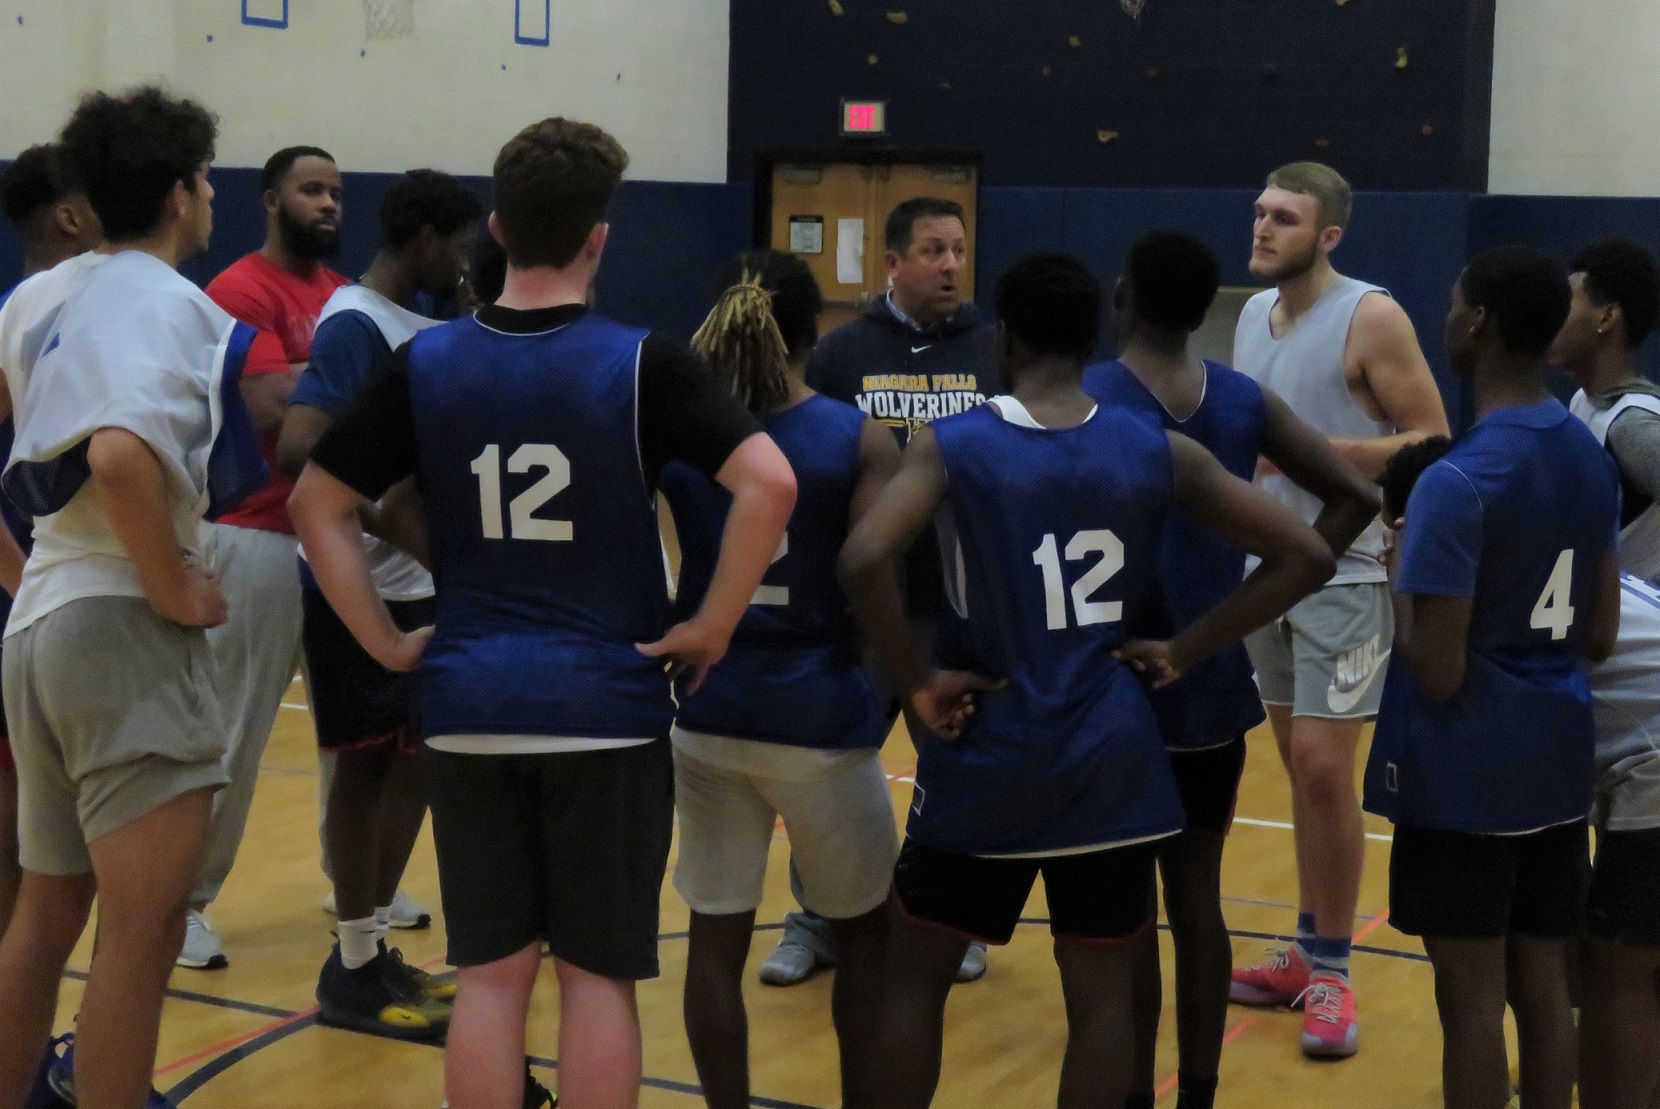 Niagara Falls Wolverines boys basketball coach Brent Gadacz addresses his team following a recent practice. It is Gadacz's first season as varsity coach following 24 years of coaching in the NF basketball program, most recently for the junior varsity. (Photo by David Yarger)